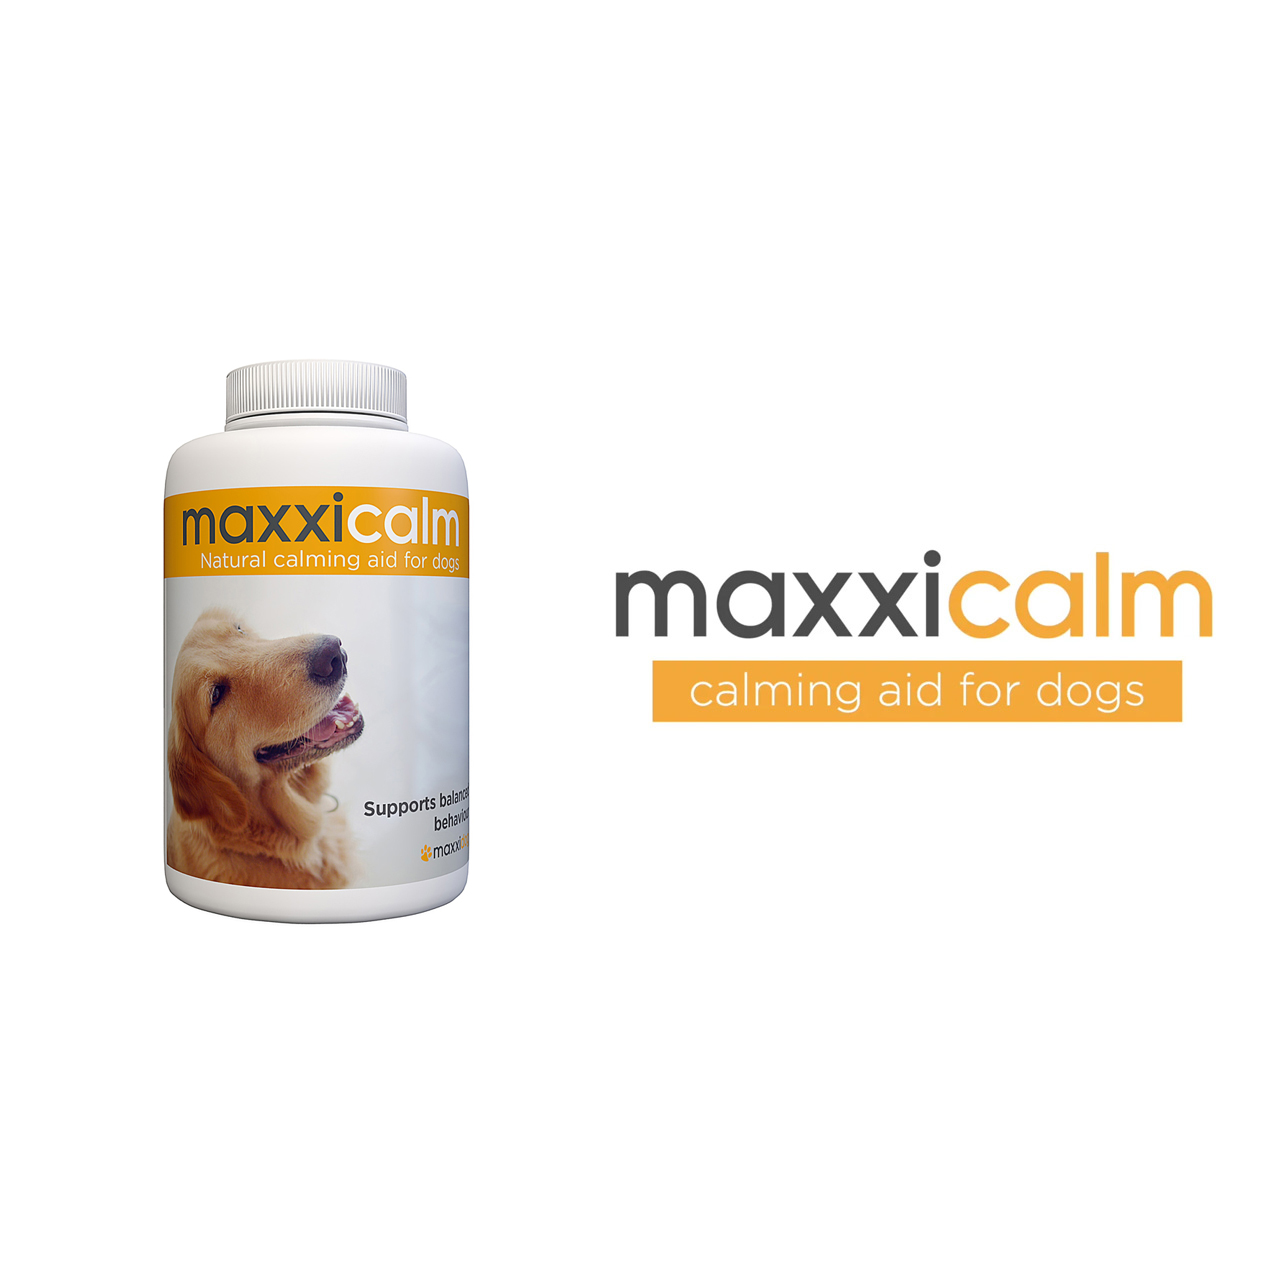 Video about maxxicalm natural calming aid for dogs from maxxipaws